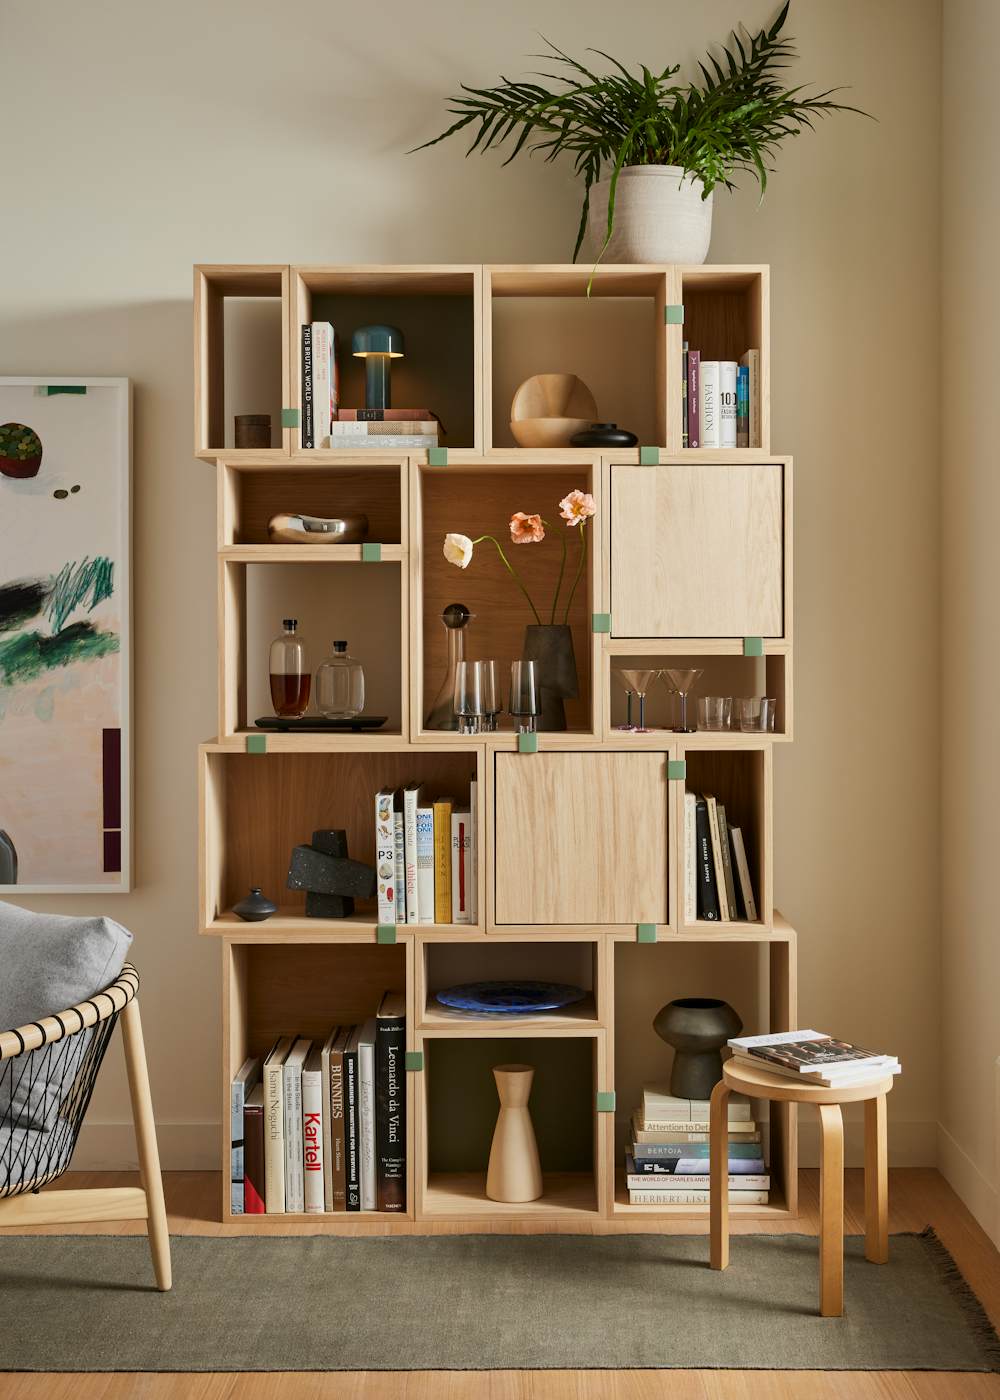 Stacked Storage System in a living room setting